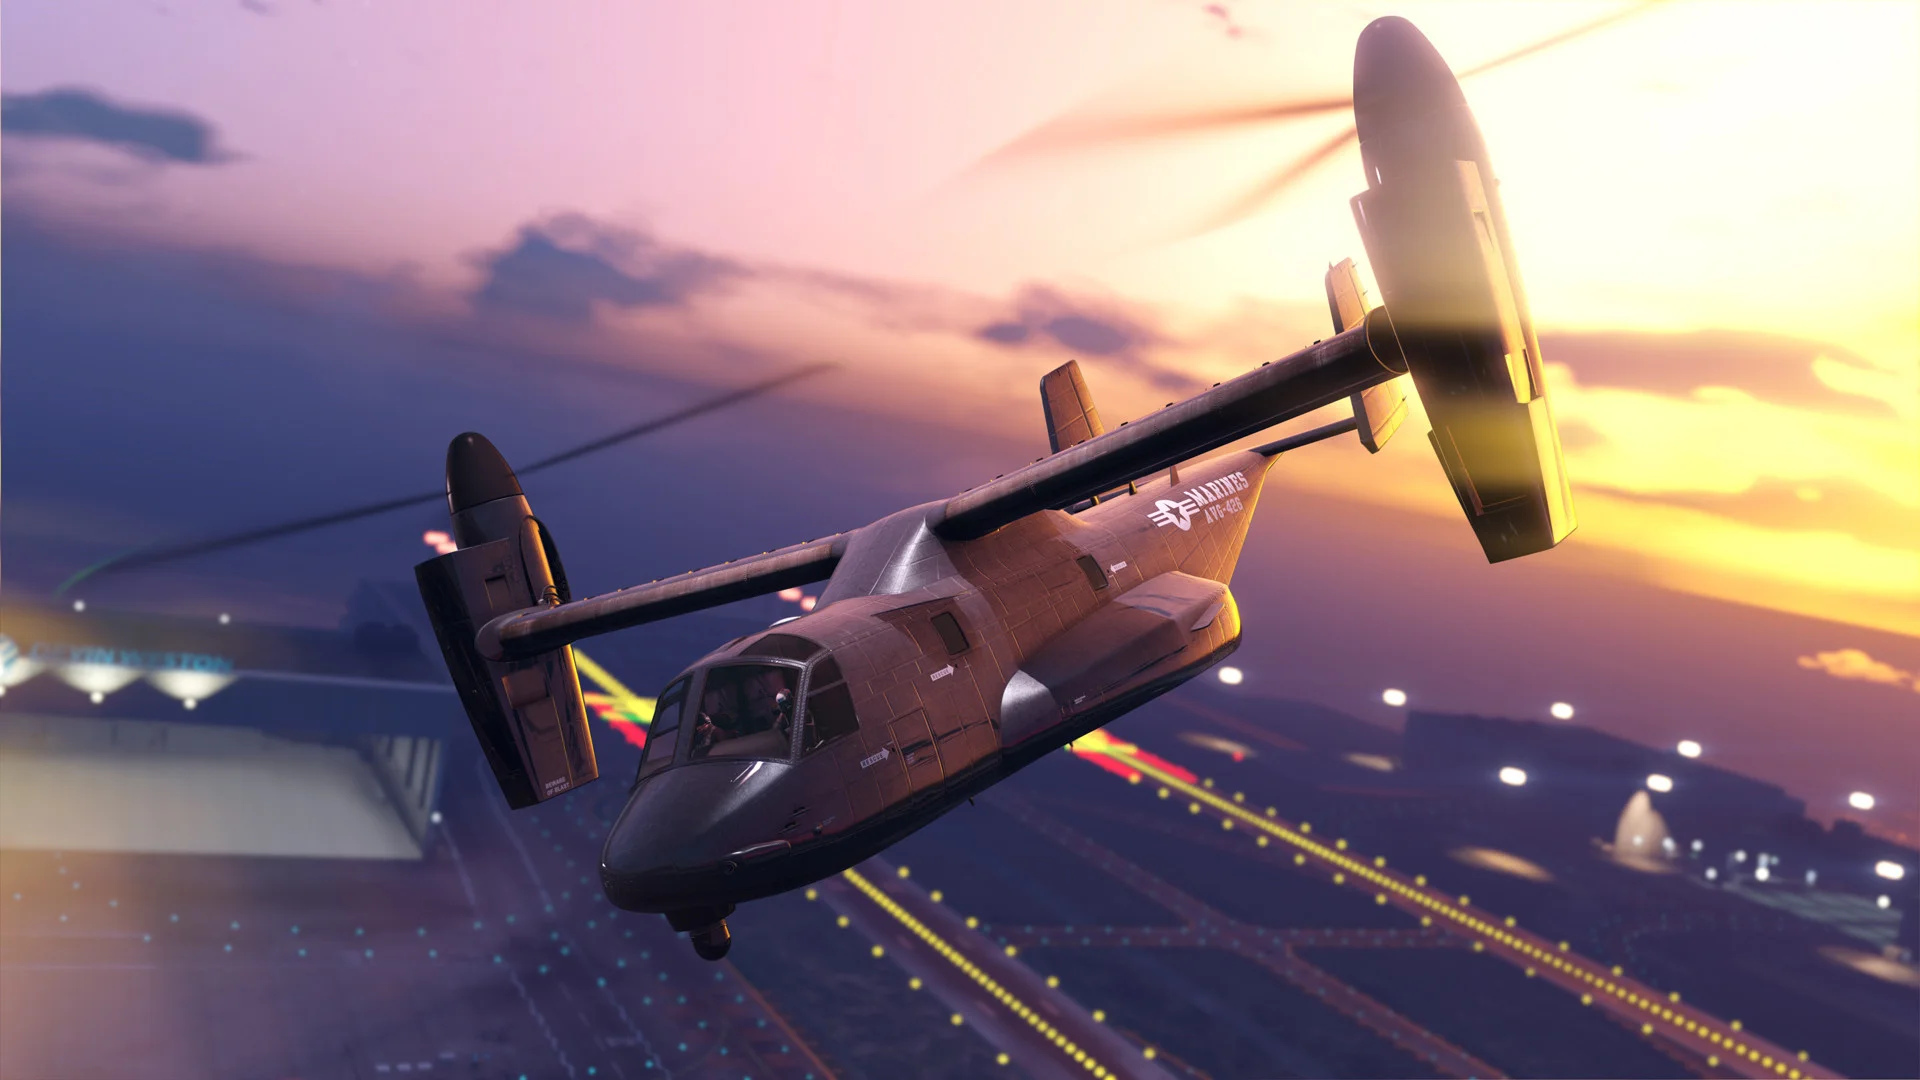 GTA Online players were reminded of the capabilities of the Mammoth Avenger aircraft